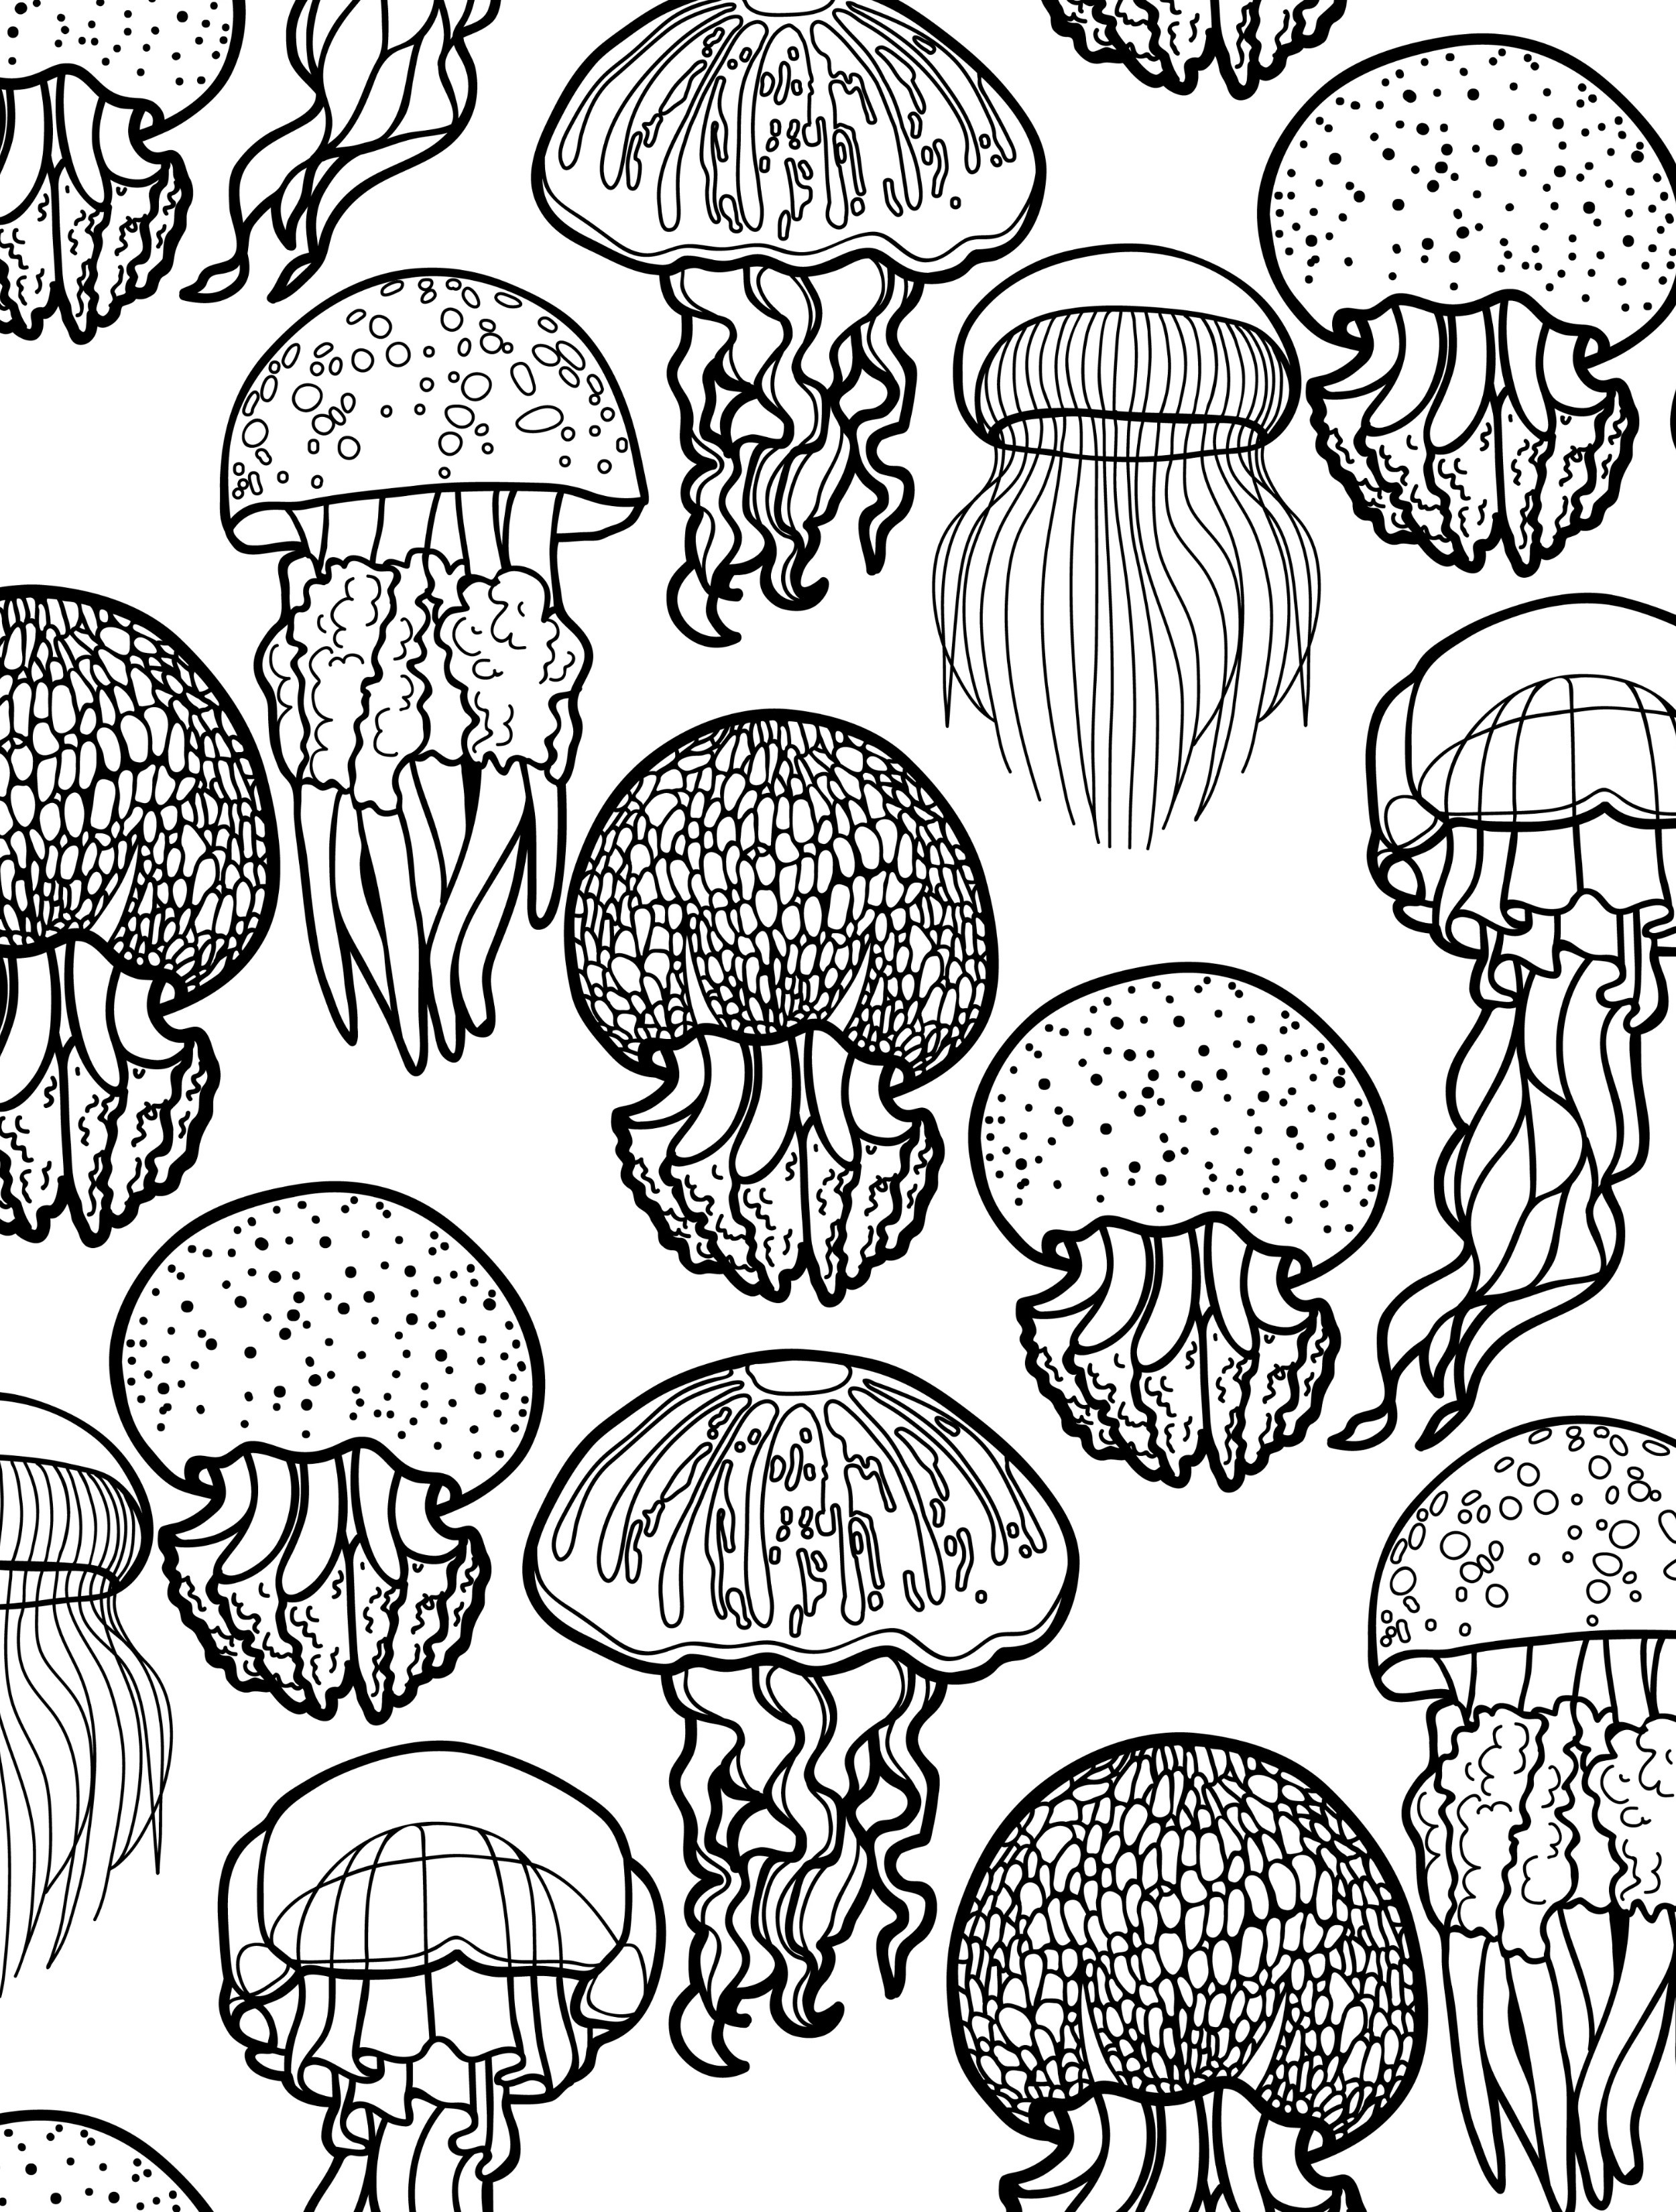 Ocean Adult Coloring Book
 1000 images about COLORING PAGES on Pinterest